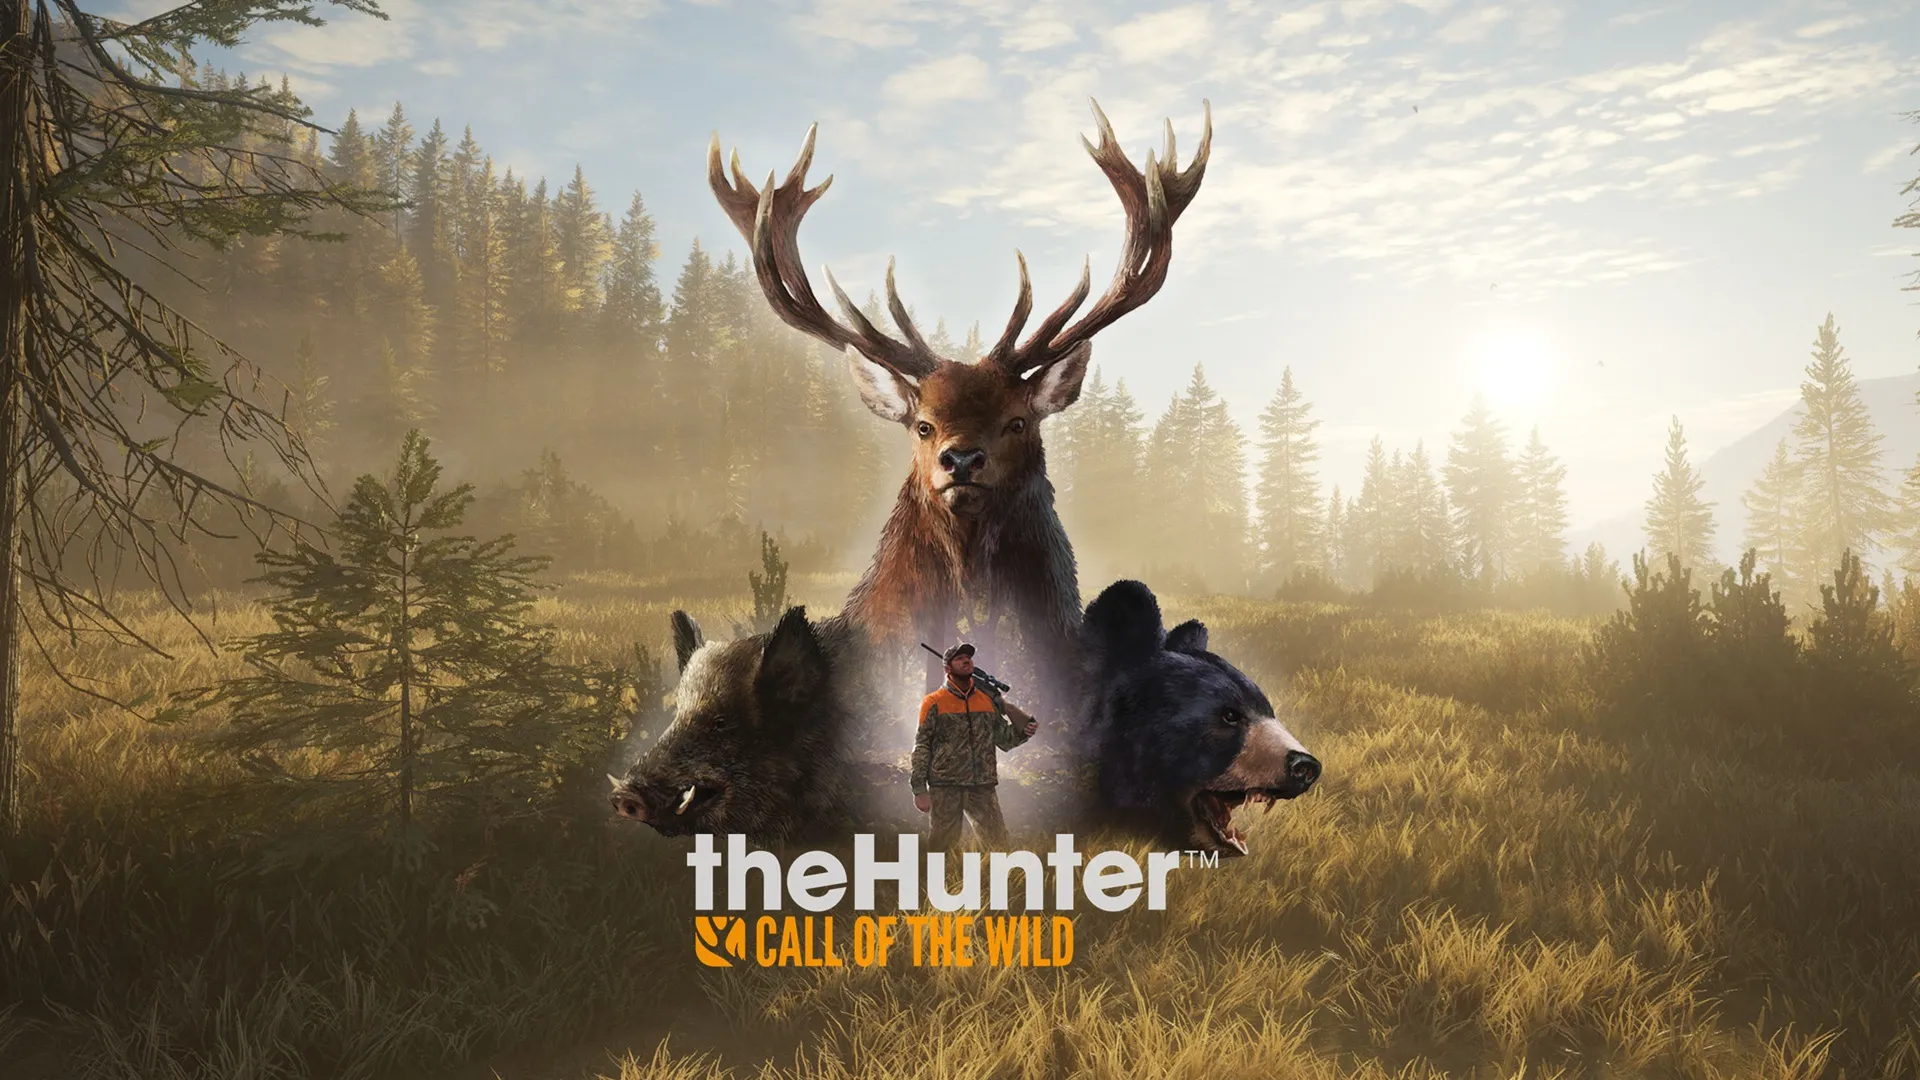 thehunter call of the wild rog ally game settings